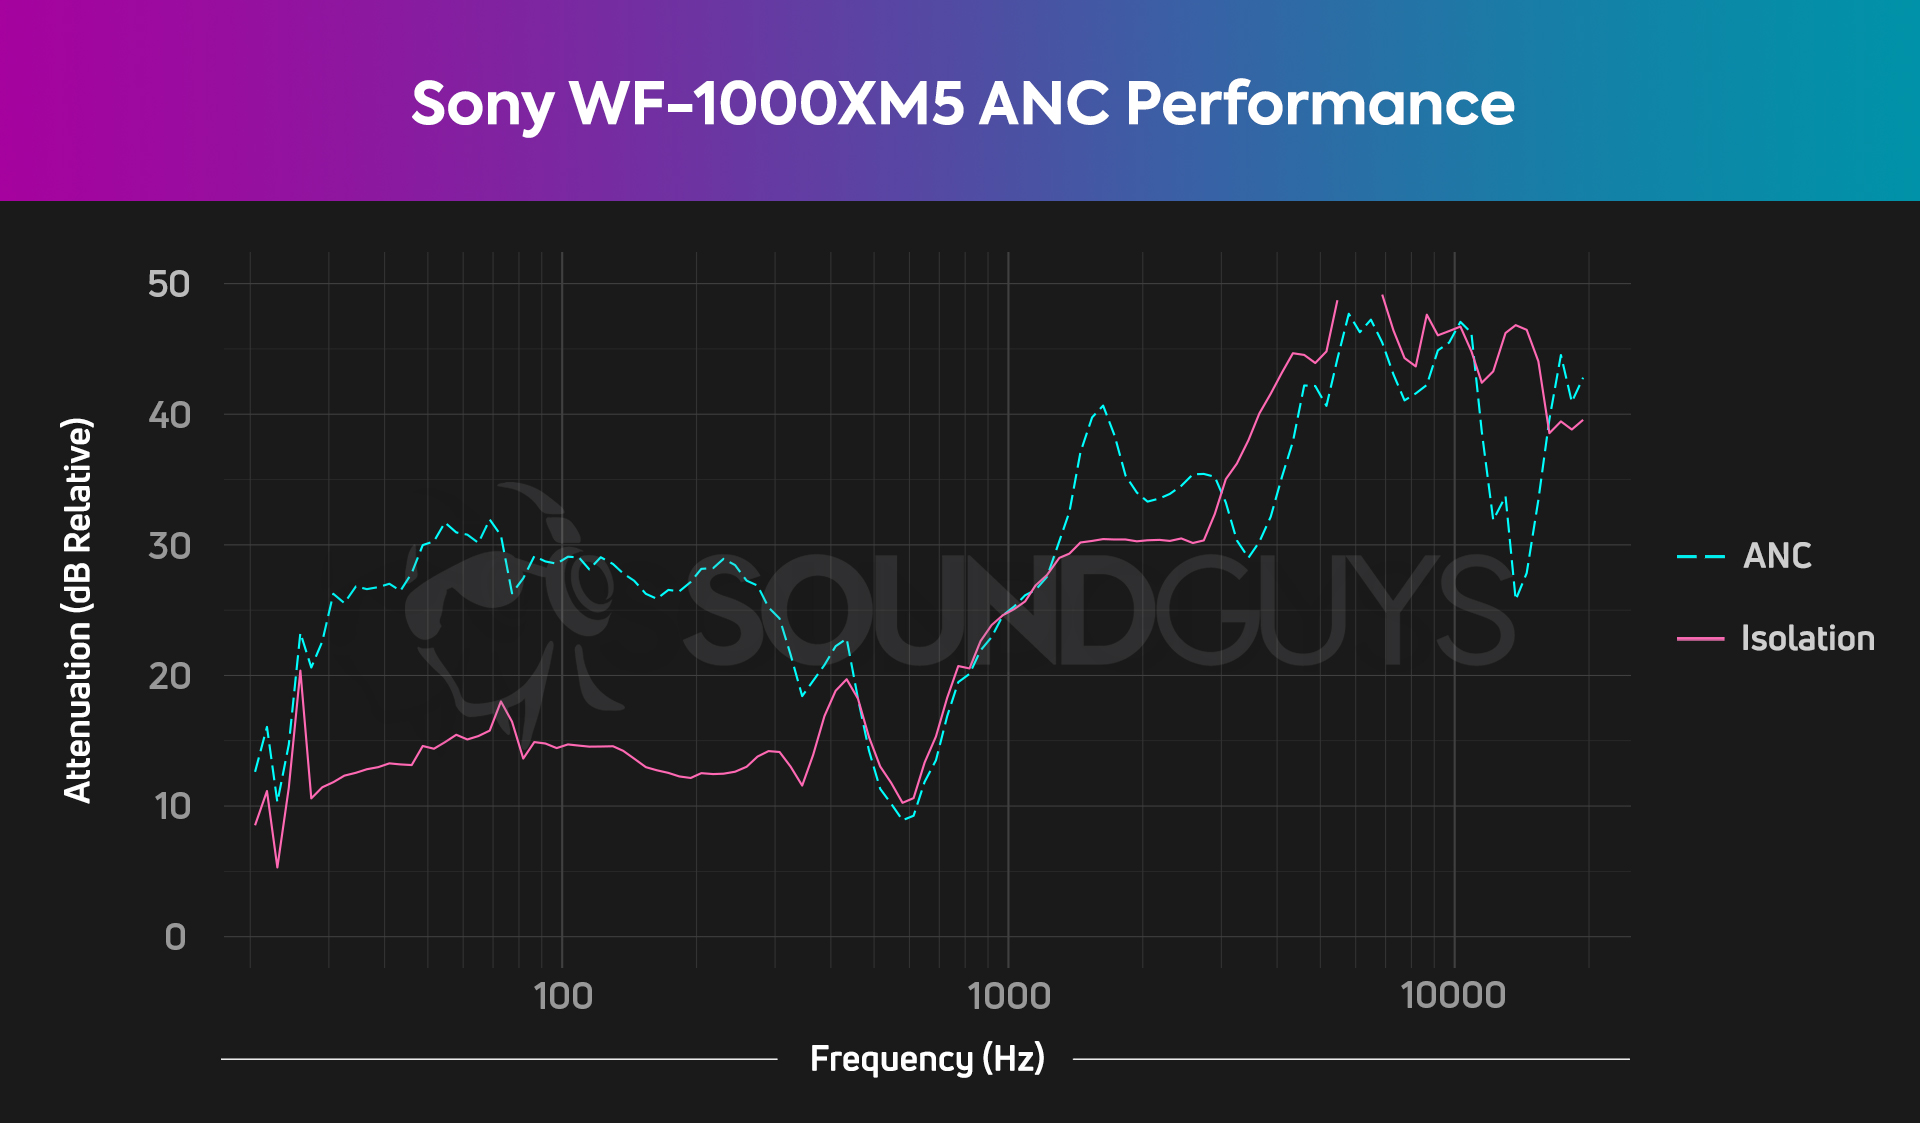 A chart depicts the Sony WF-1000XM5 noise canceling and isolation performance.